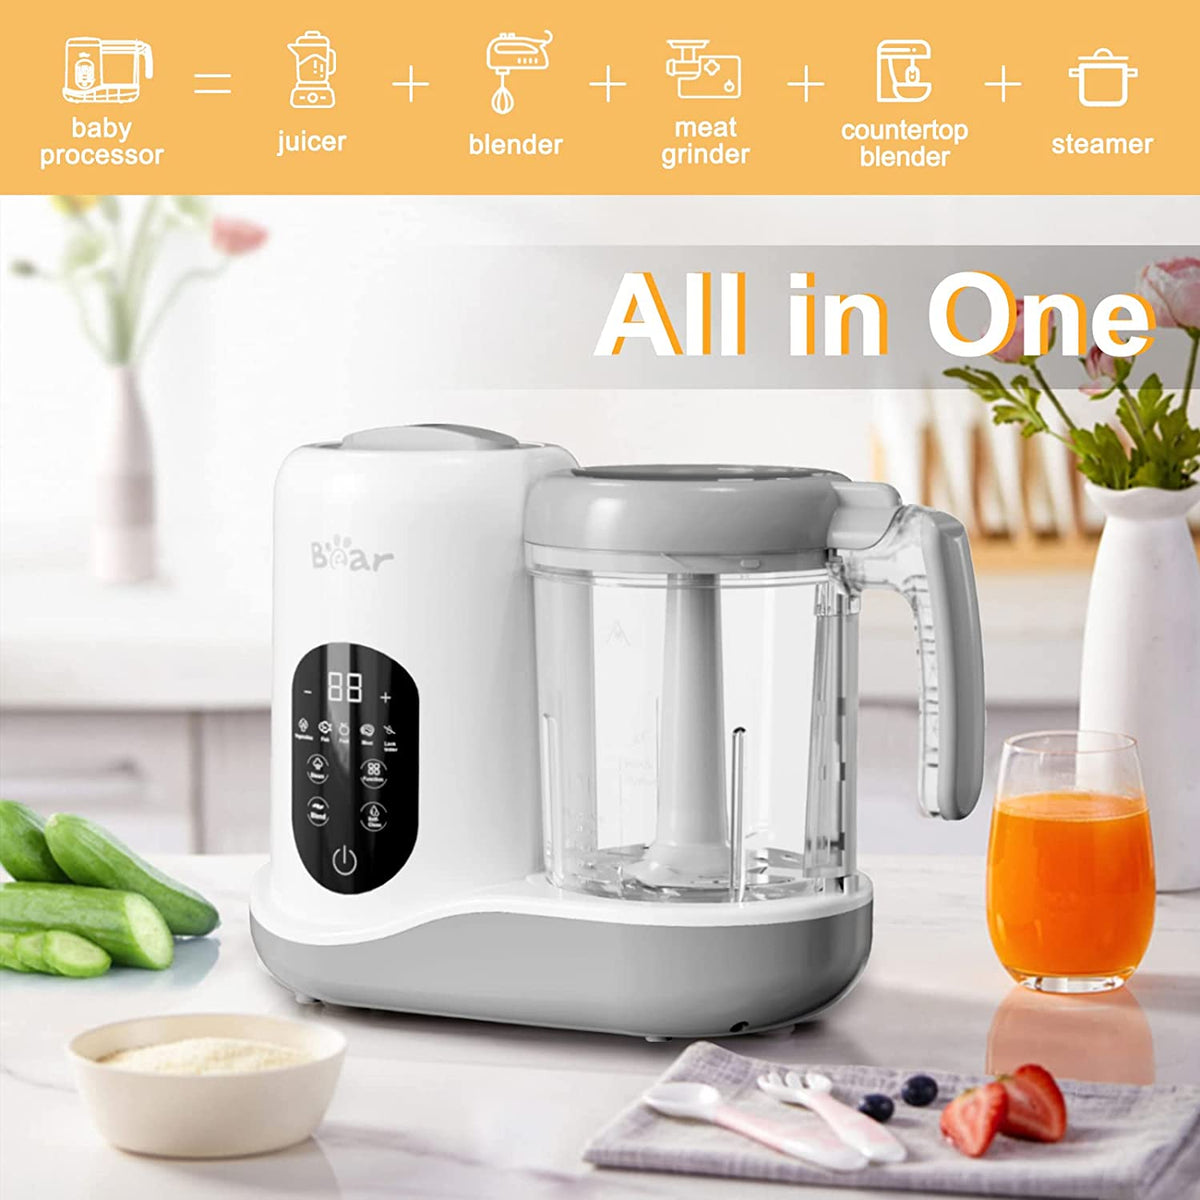 Baby Food Maker | Baby Food Processor Blender Grinder Steamer | Cooks &  Blends Healthy Homemade Baby Food in Minutes | Self Cleans | Touch Screen